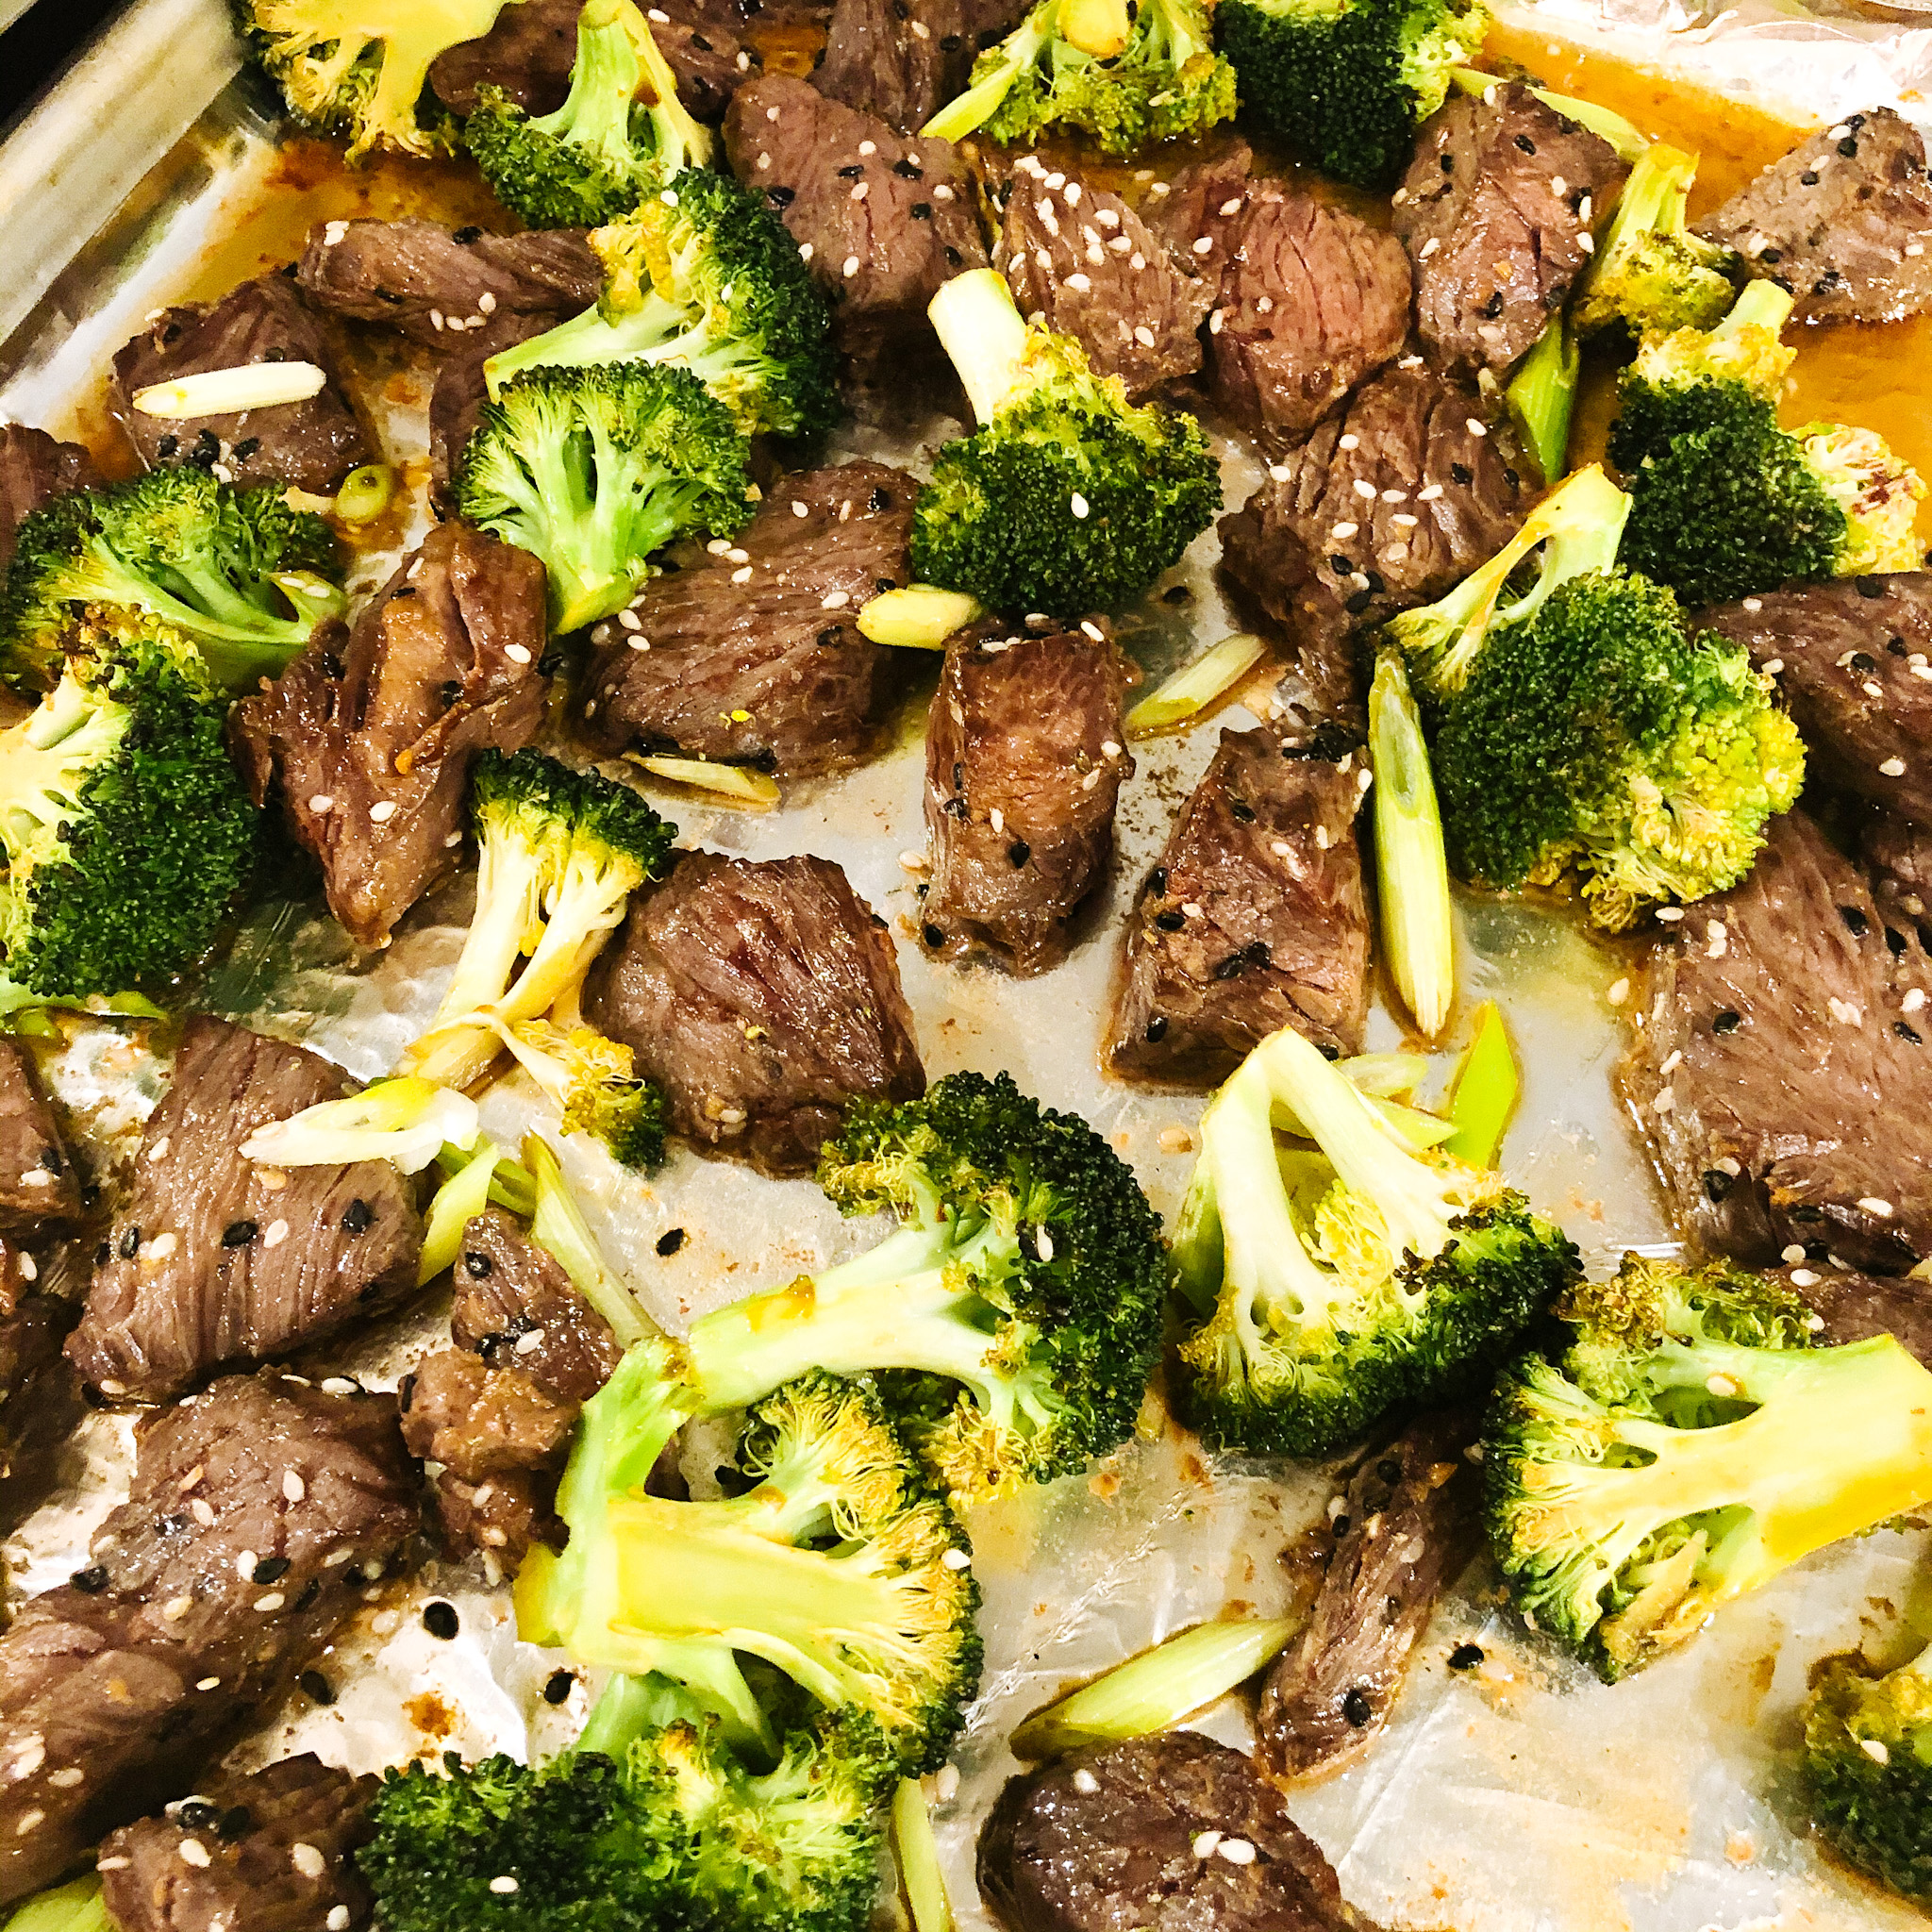 the cooked beef and broccoli on the pan